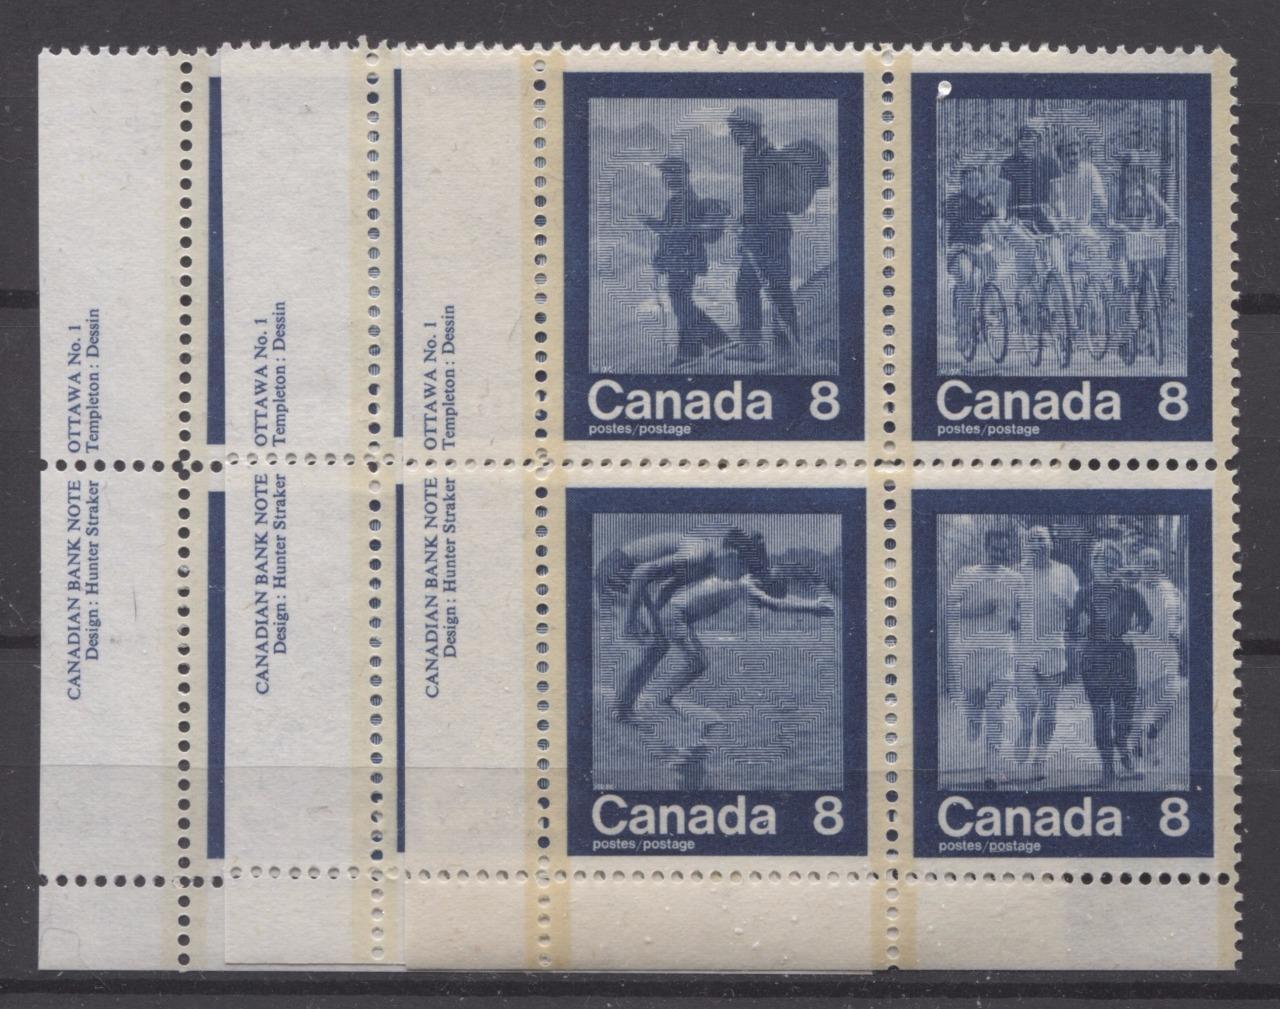 Canada #632a (SG#768a) 1974 Summer Sports Issue Block of 4 Paper/Tag Type 3 Plate 1 LR VF-80 NH Brixton Chrome 